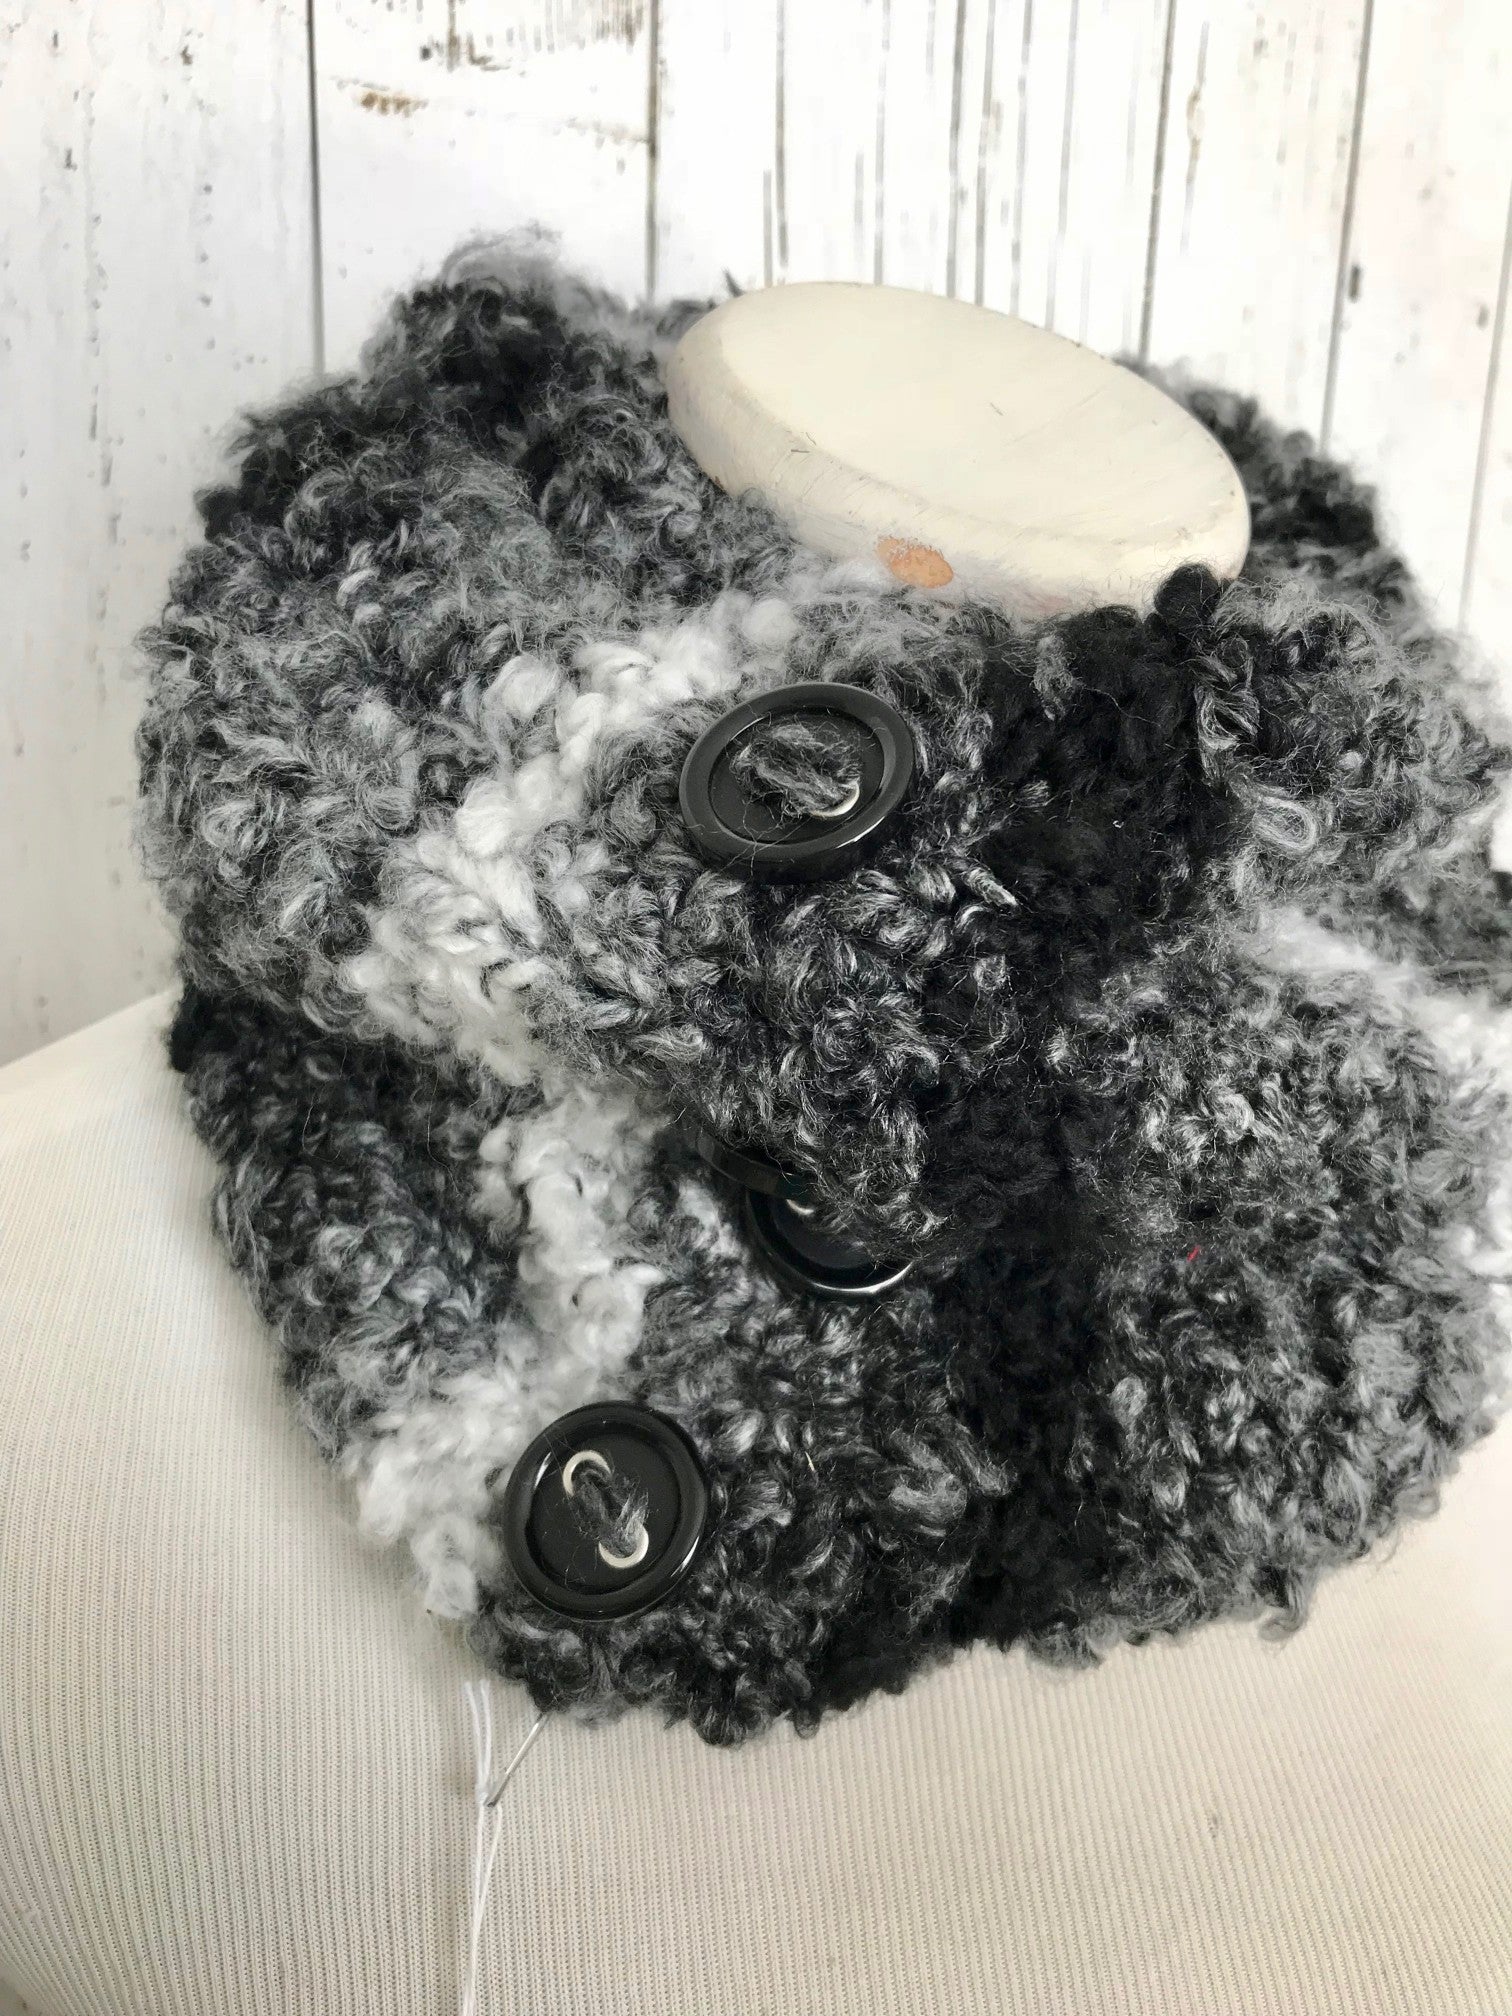 Knit Button Cowl in black, grey, and white stripes